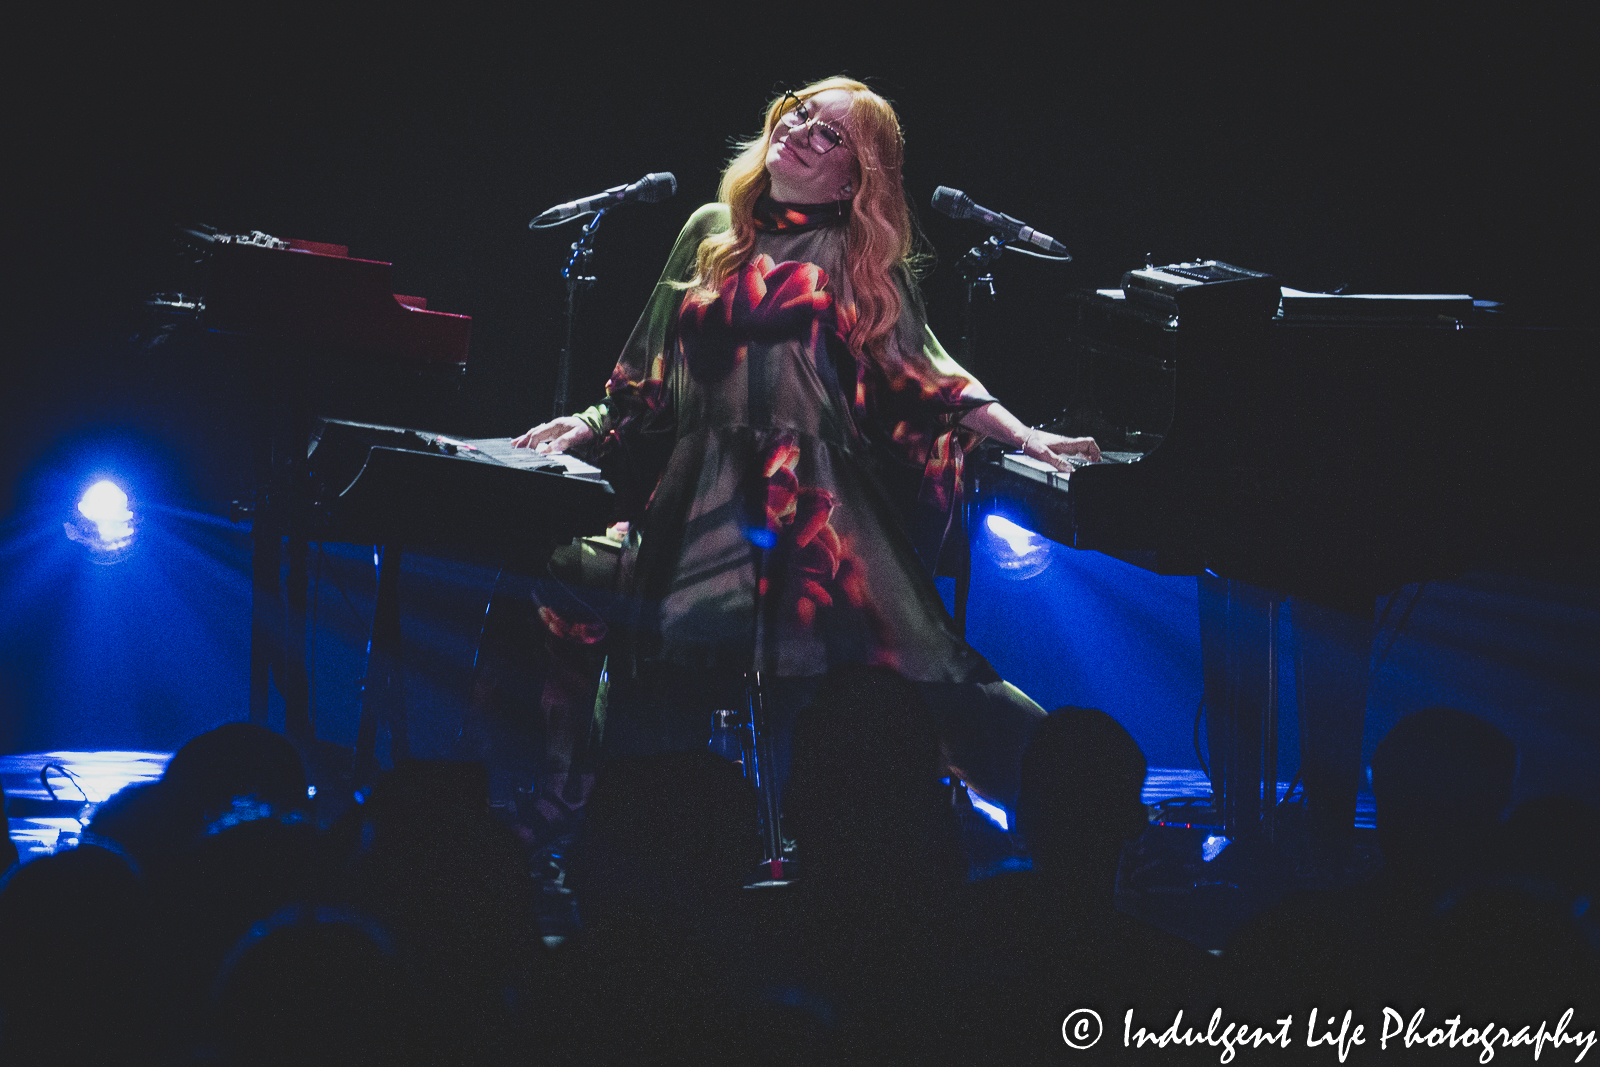 Pop rock artist Tori Amos playing the piano and keyboard simultaneously during her performance at Kansas City Music Hall on May 31, 2022.